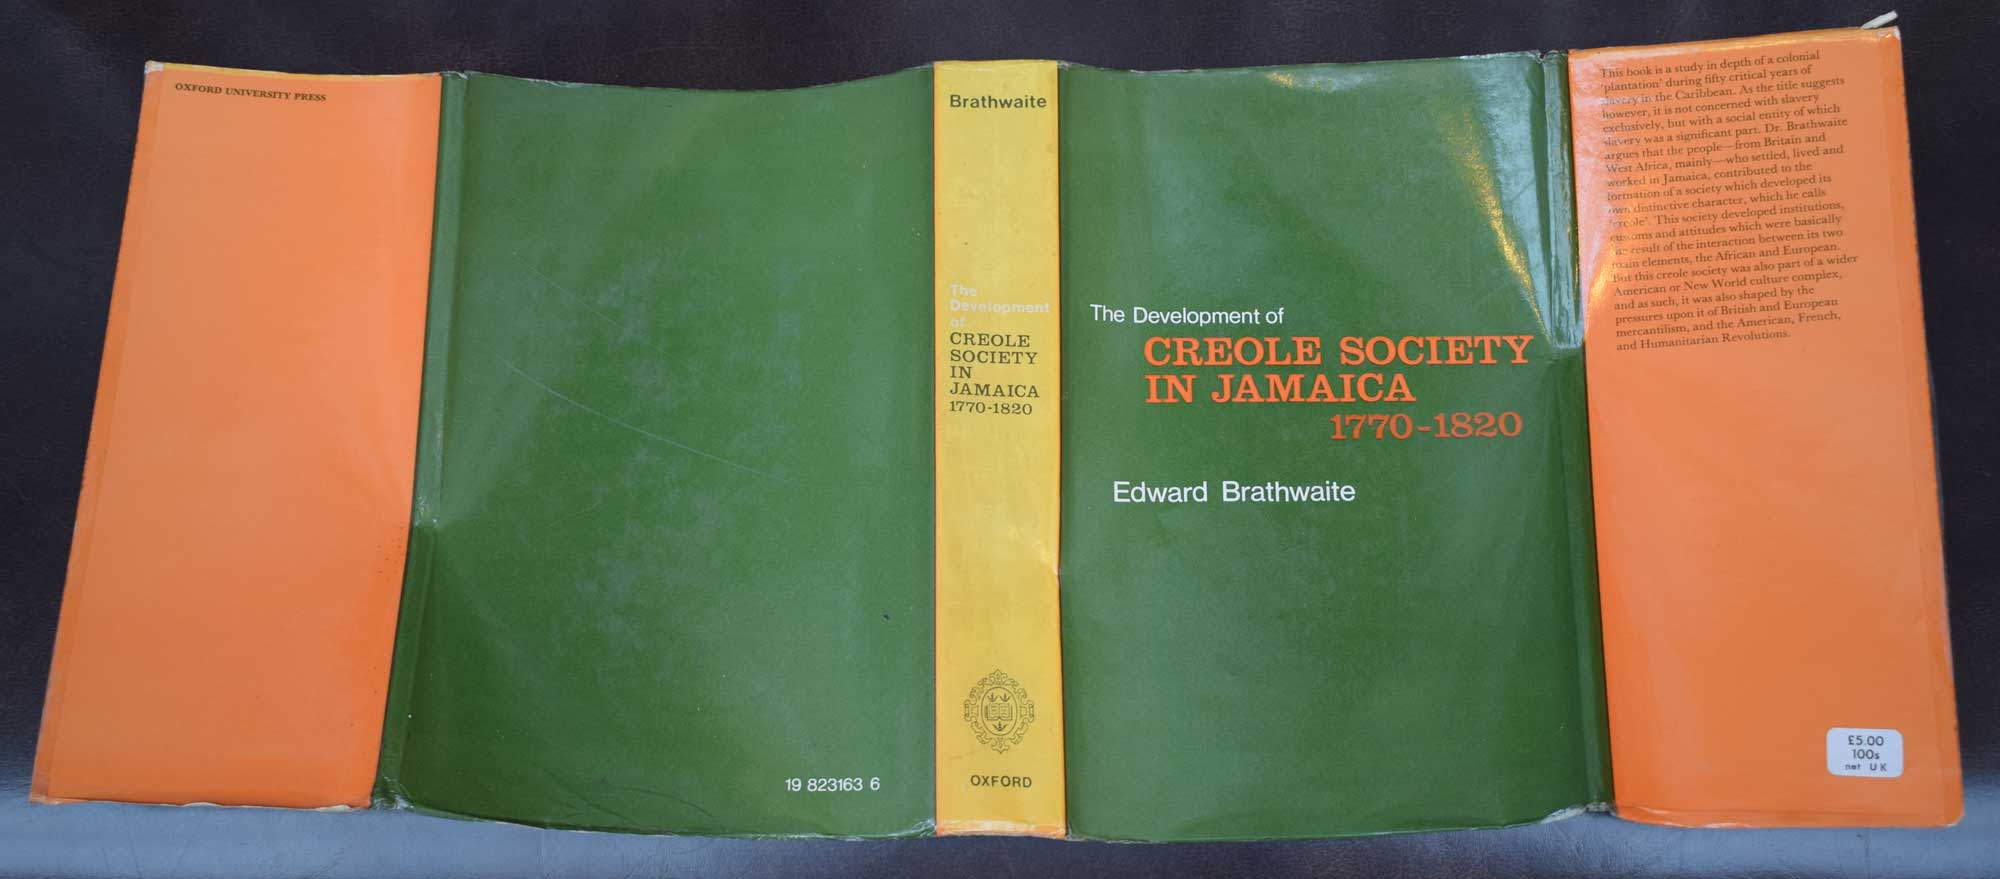 The Development of Creole Society in Jamaica 1770 - 1820